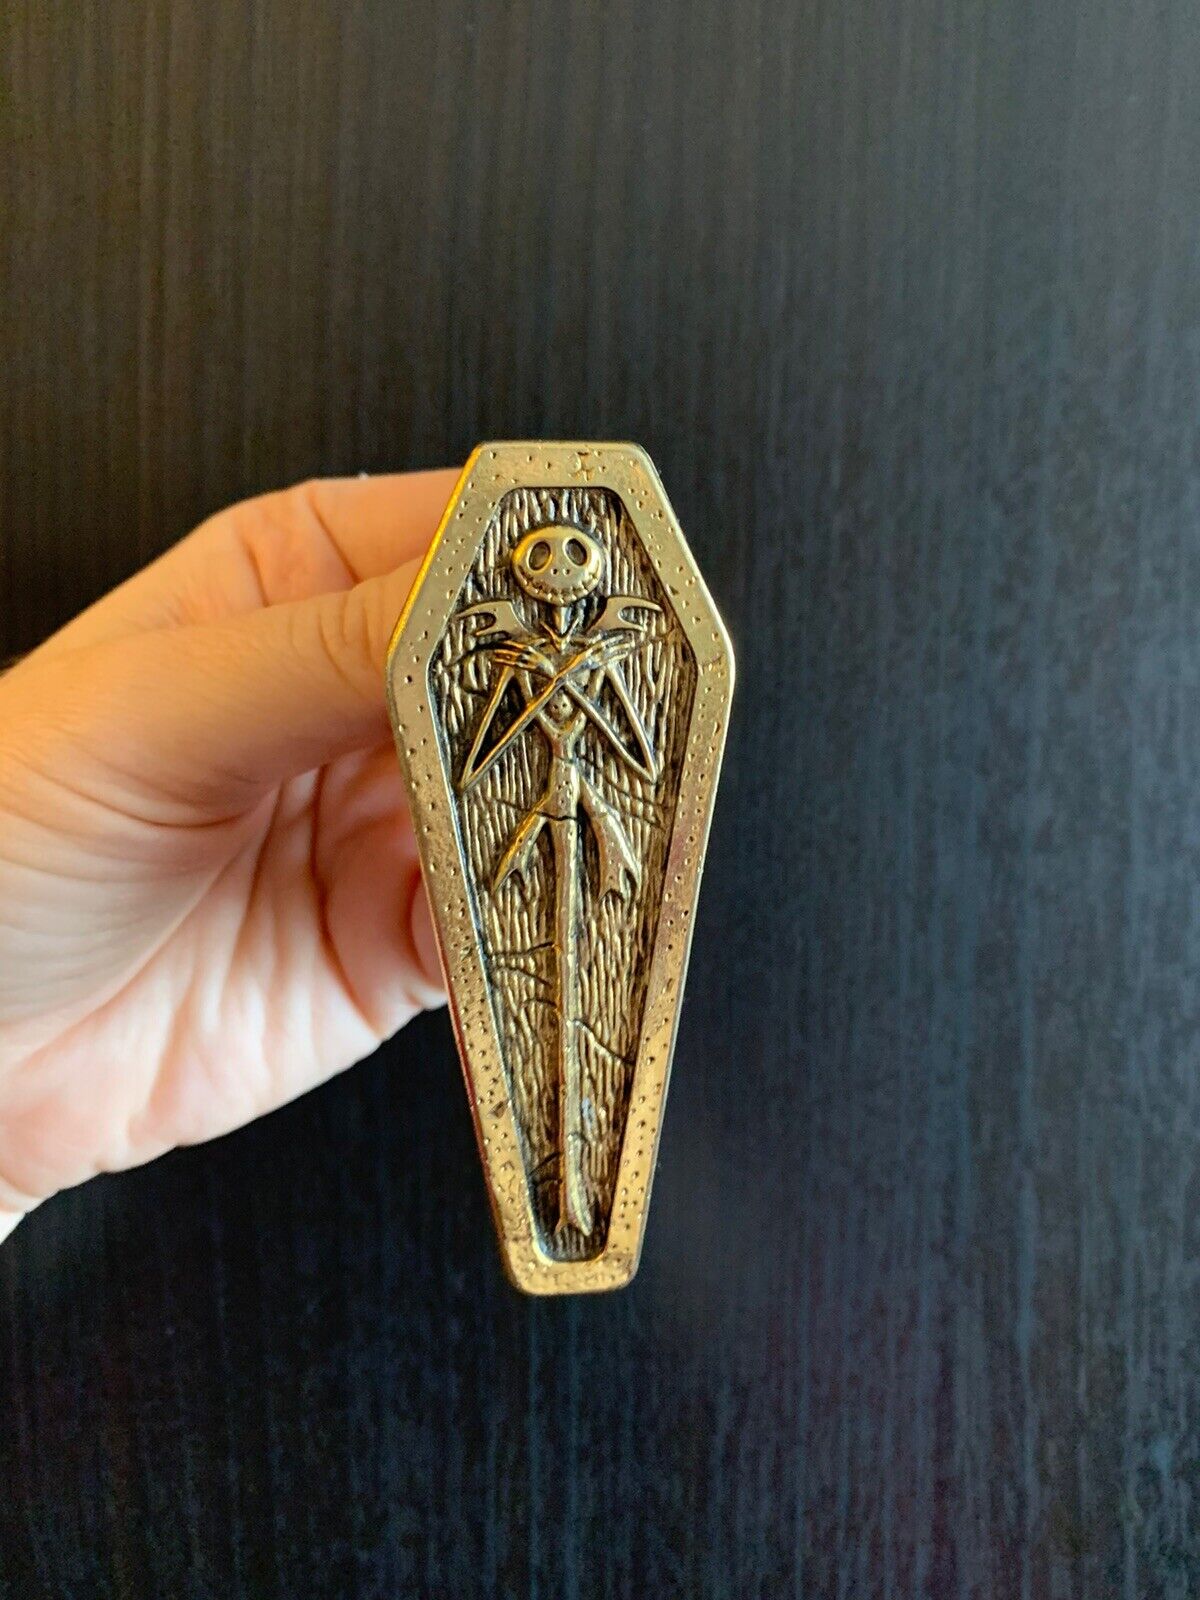 RARE- Jack Skellington coffin pin - Made By Touchstone Pictures Sega- See Descr.